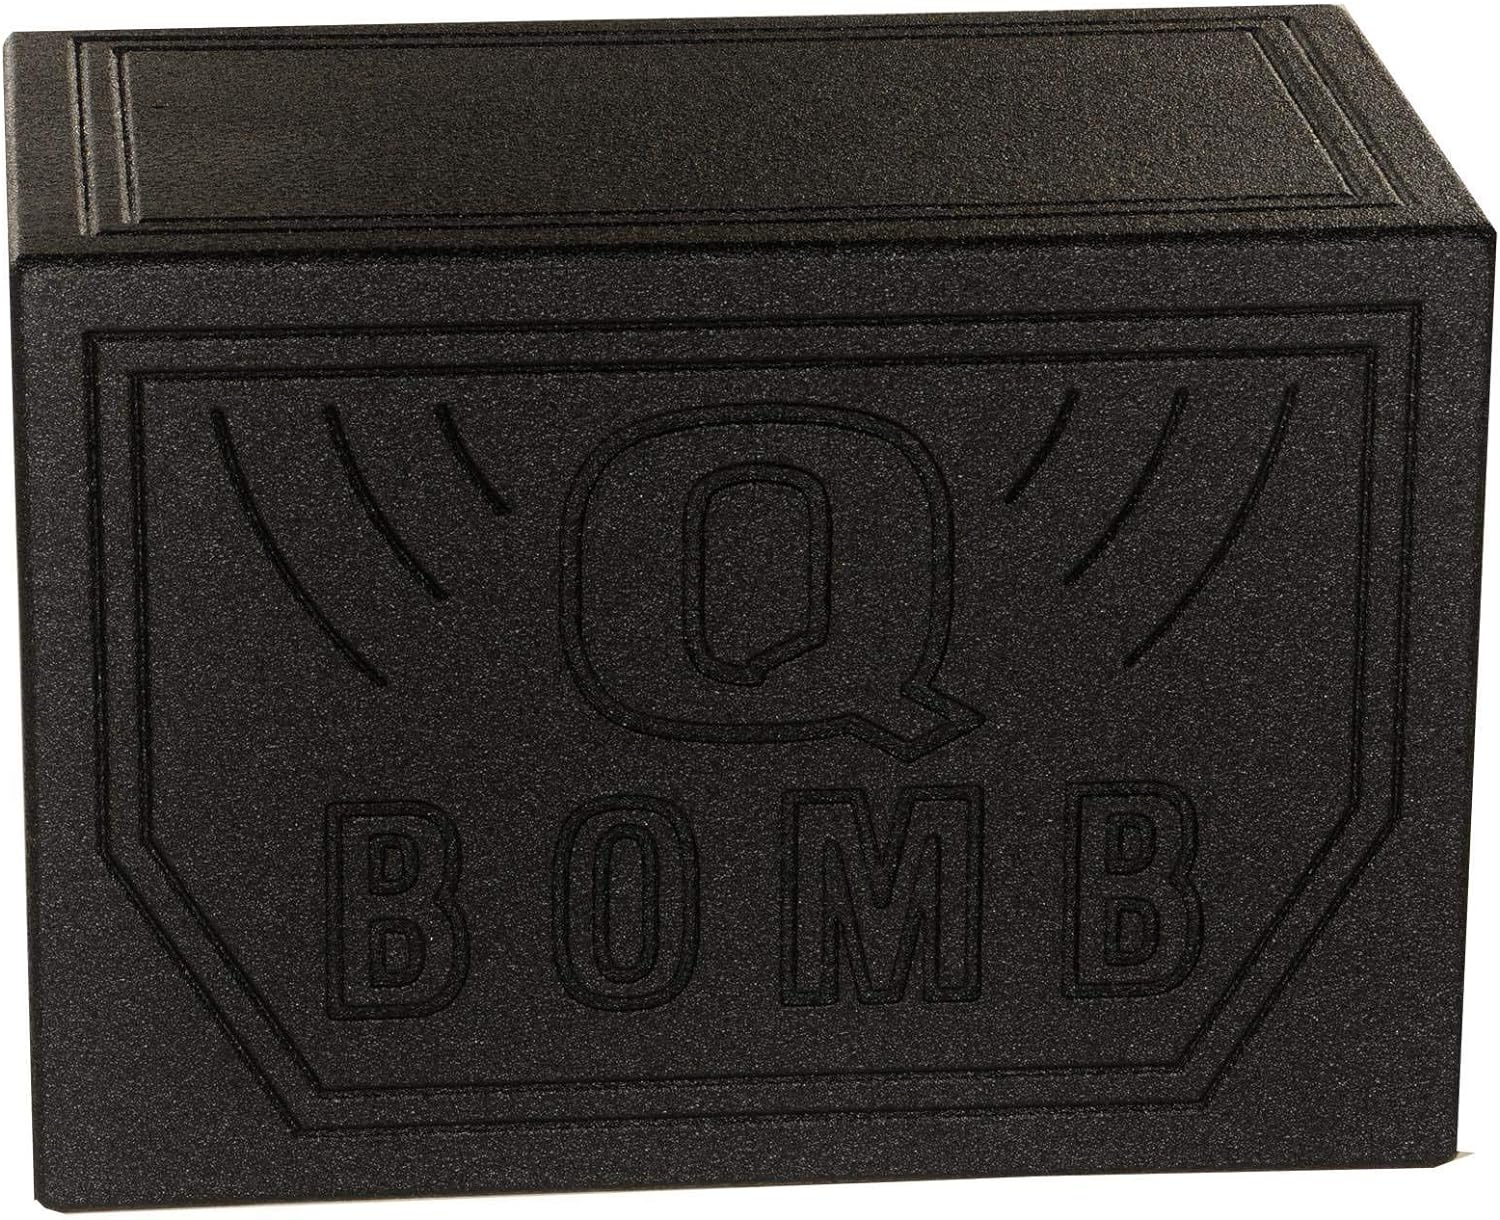 QPower QBOMB, Single 10" Tough Vented Shallow Ported Car Audio Subwoofer Box Enclosure with 1.4 Cubic Feet of Air Space, Black